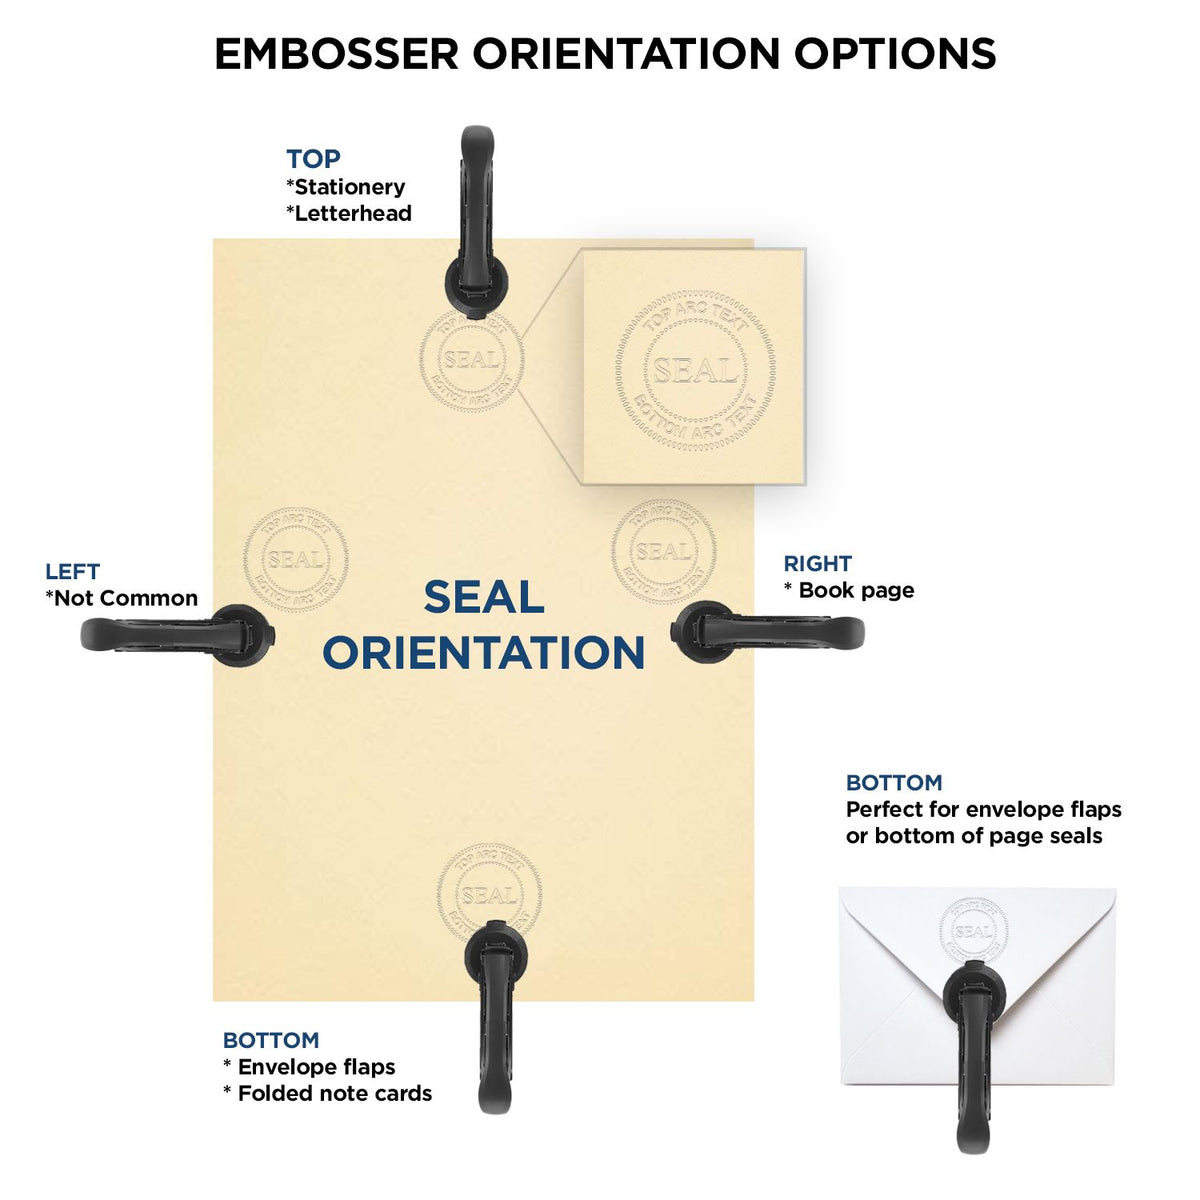 An infographic for the Handheld Georgia Professional Engineer Embosser showing embosser orientation, this is showing examples of a top, bottom, right and left insert.